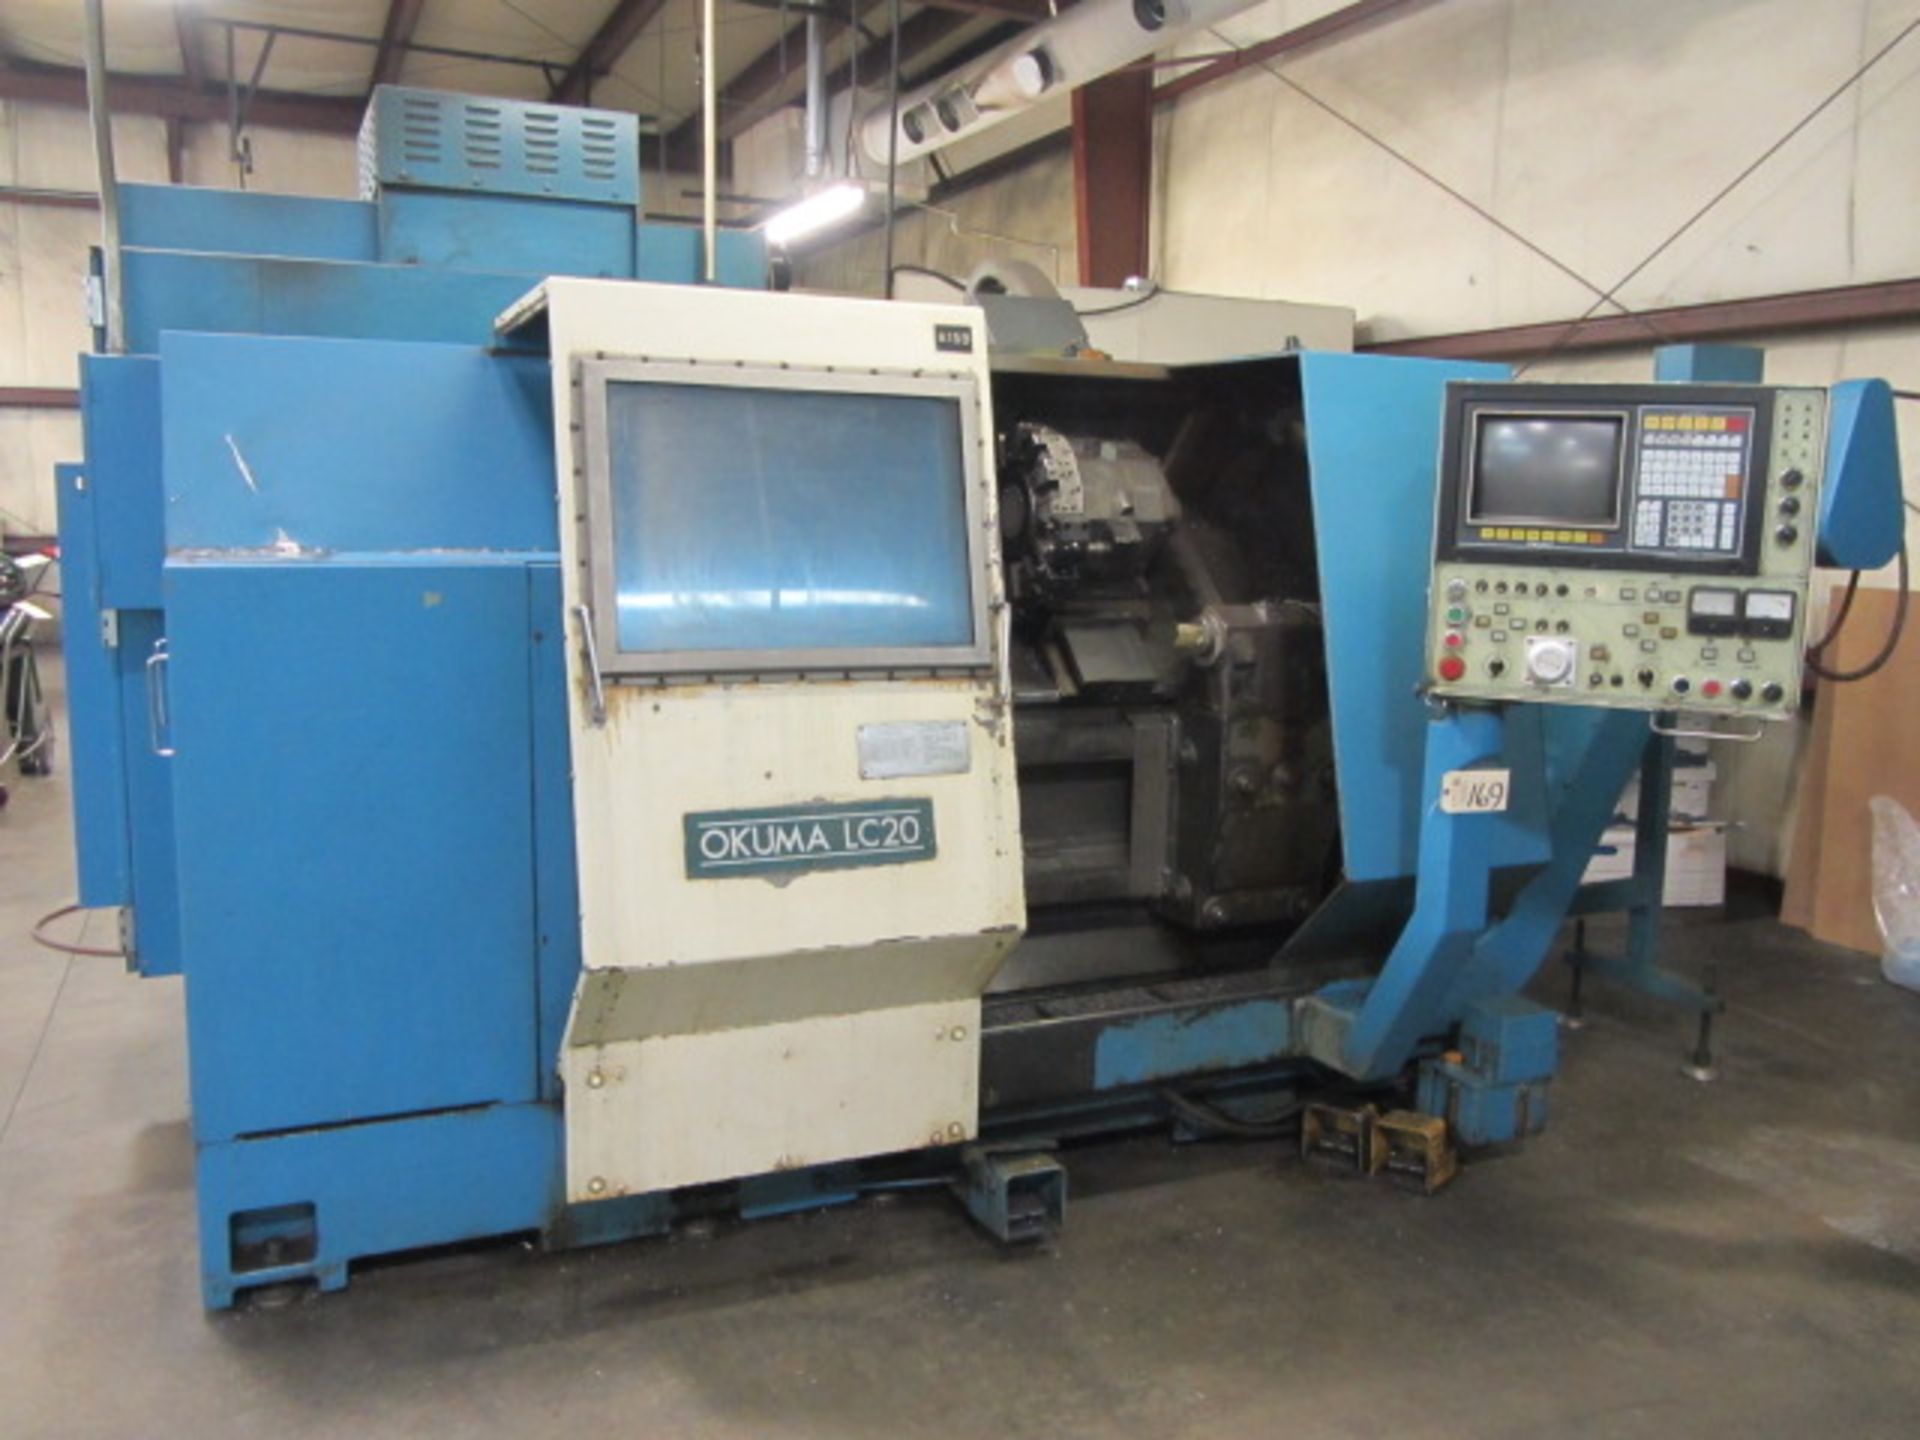 Okuma LC20 CNC Turning Center with 10'' 3-Jaw Power Chuck, 24'' Max Distance to Tailstock, Spindle